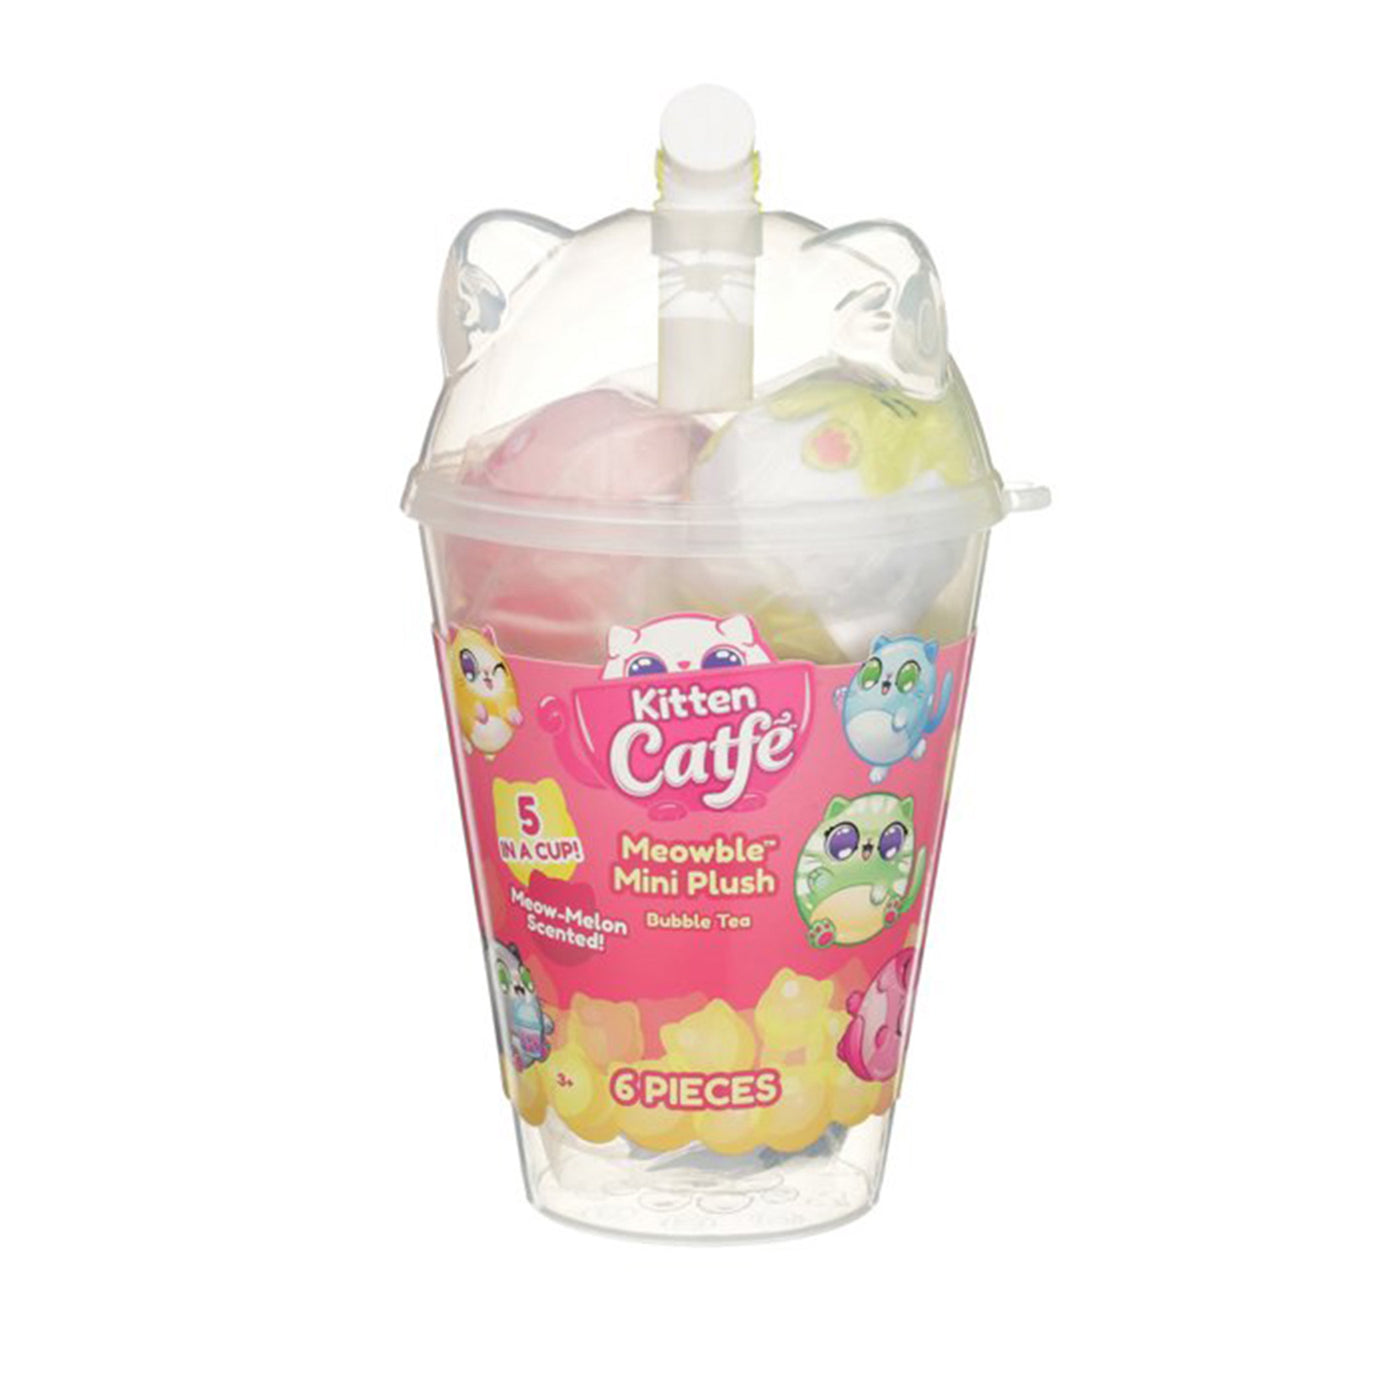 Kitten Catfé® 5" Plush Strawberry (Meowberry Scent) in a Boba Cup